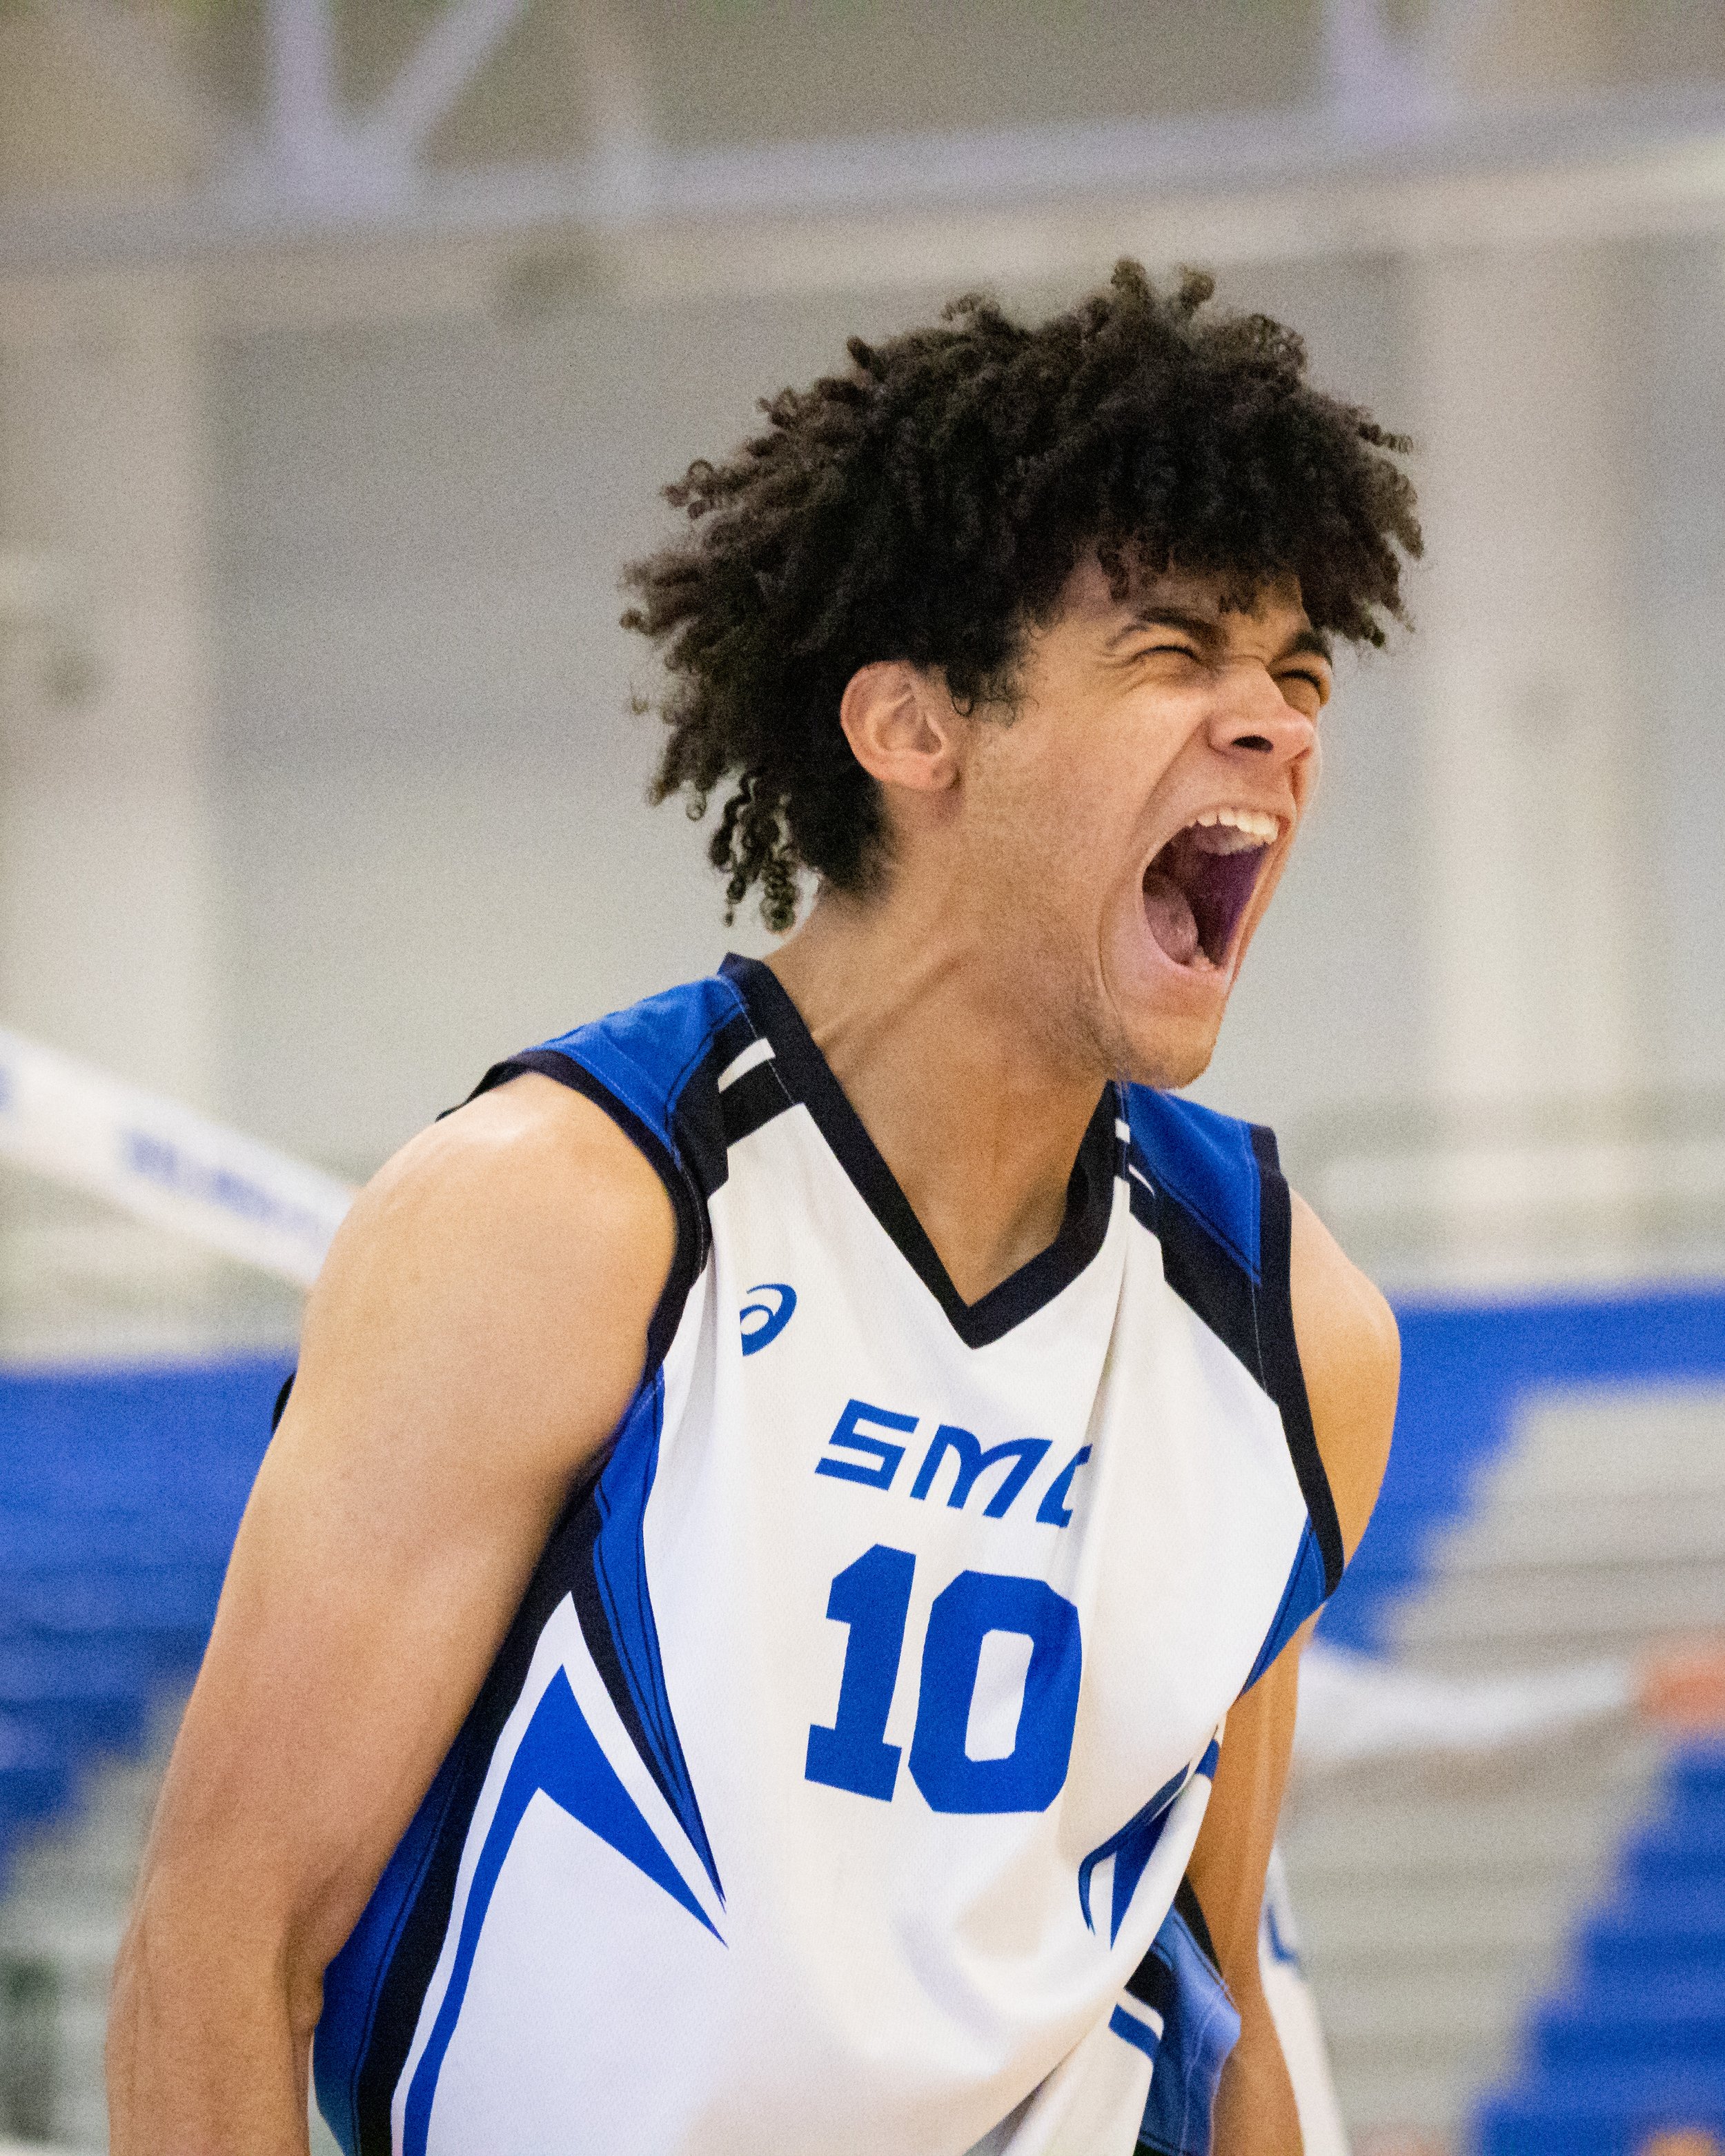  Santa Monica College Corsair outside hitter Nate Davis cheering after the Corsairs score during the first set of a home game against Santa Barbara City College Vaqueros in Santa Monica, Calif., on Friday, March 24, 2023. The game resulted in the Cor